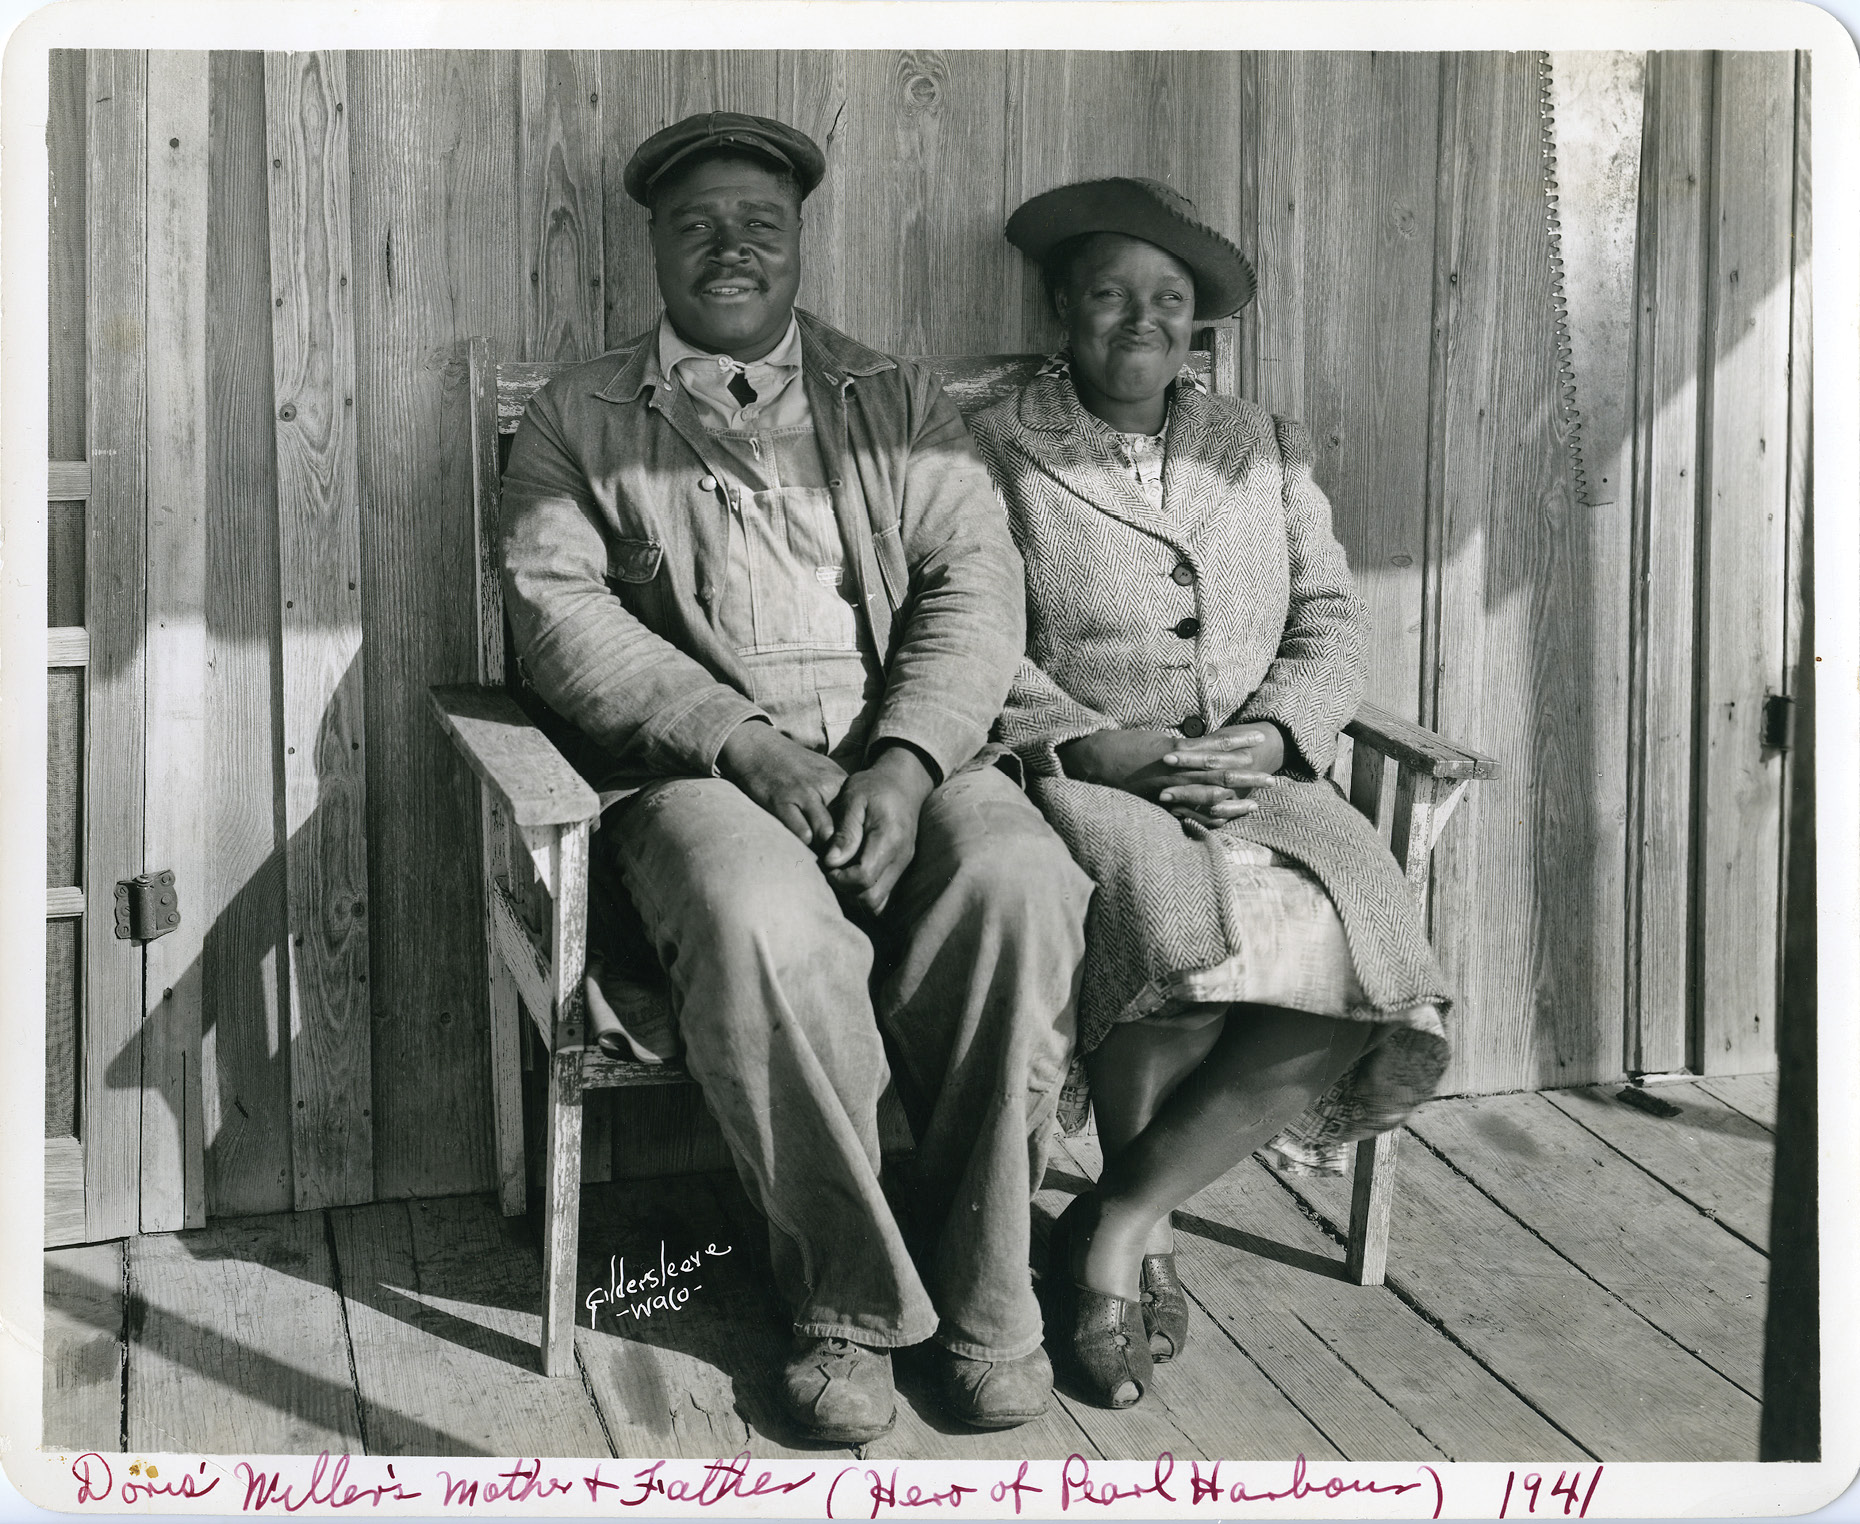 Doris Miller's mother and father